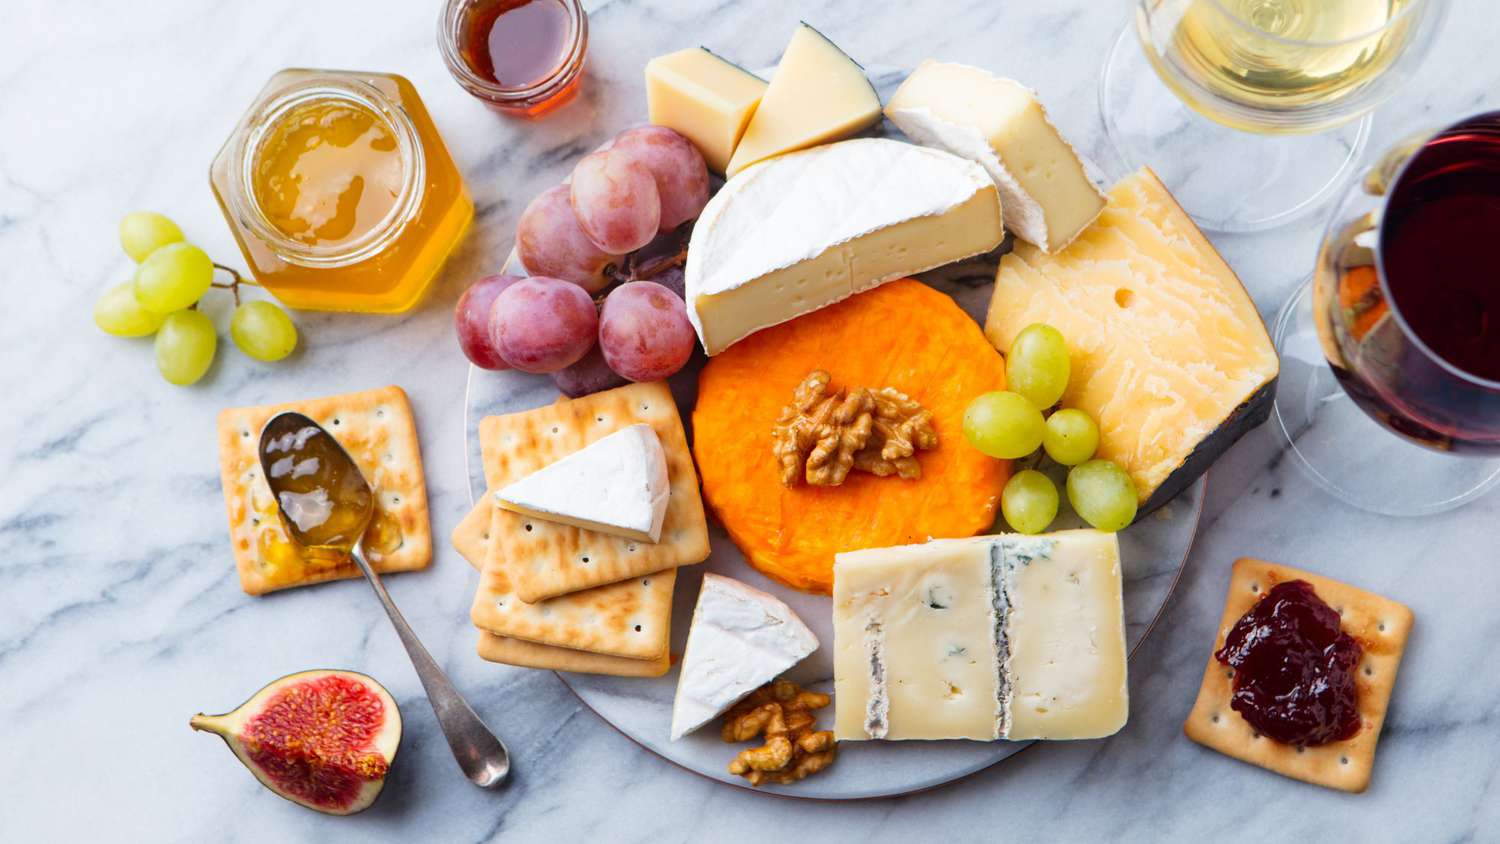 Cheese platter or cheese board ideas, tips, and cheeses - pretty cheese platter